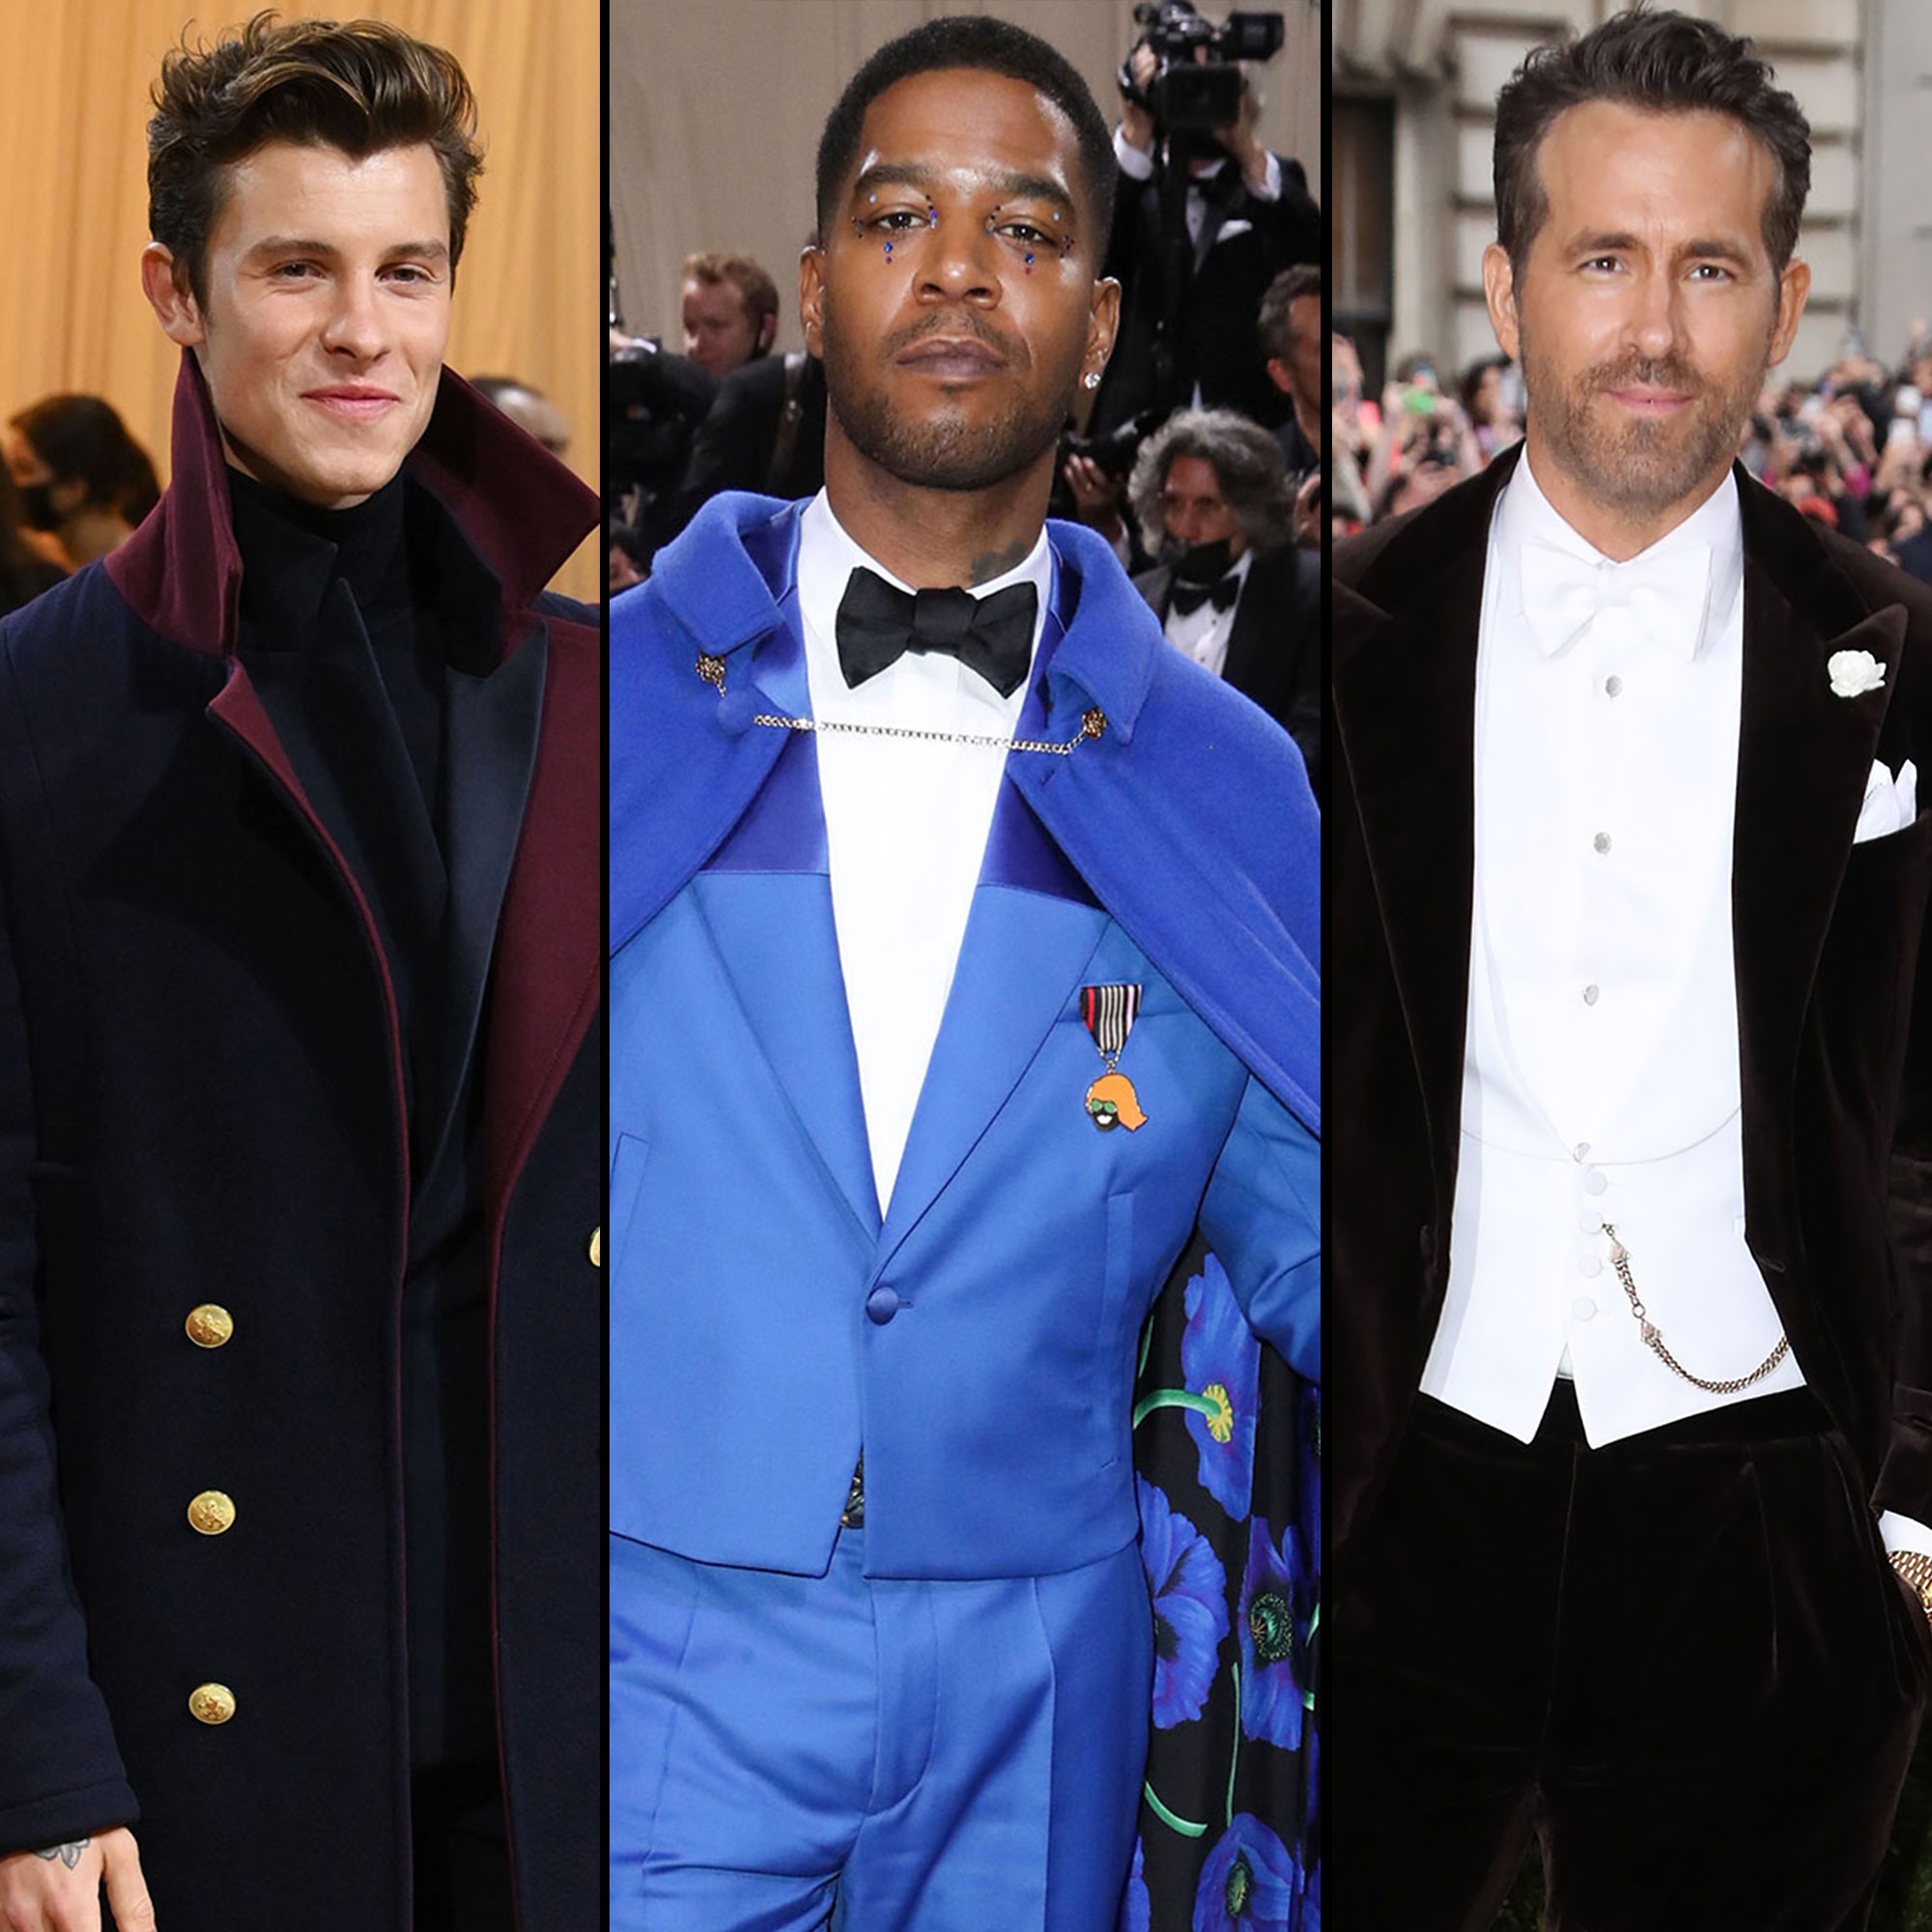 The Most Wild, Wonderful, and American(ish) Menswear at the Met